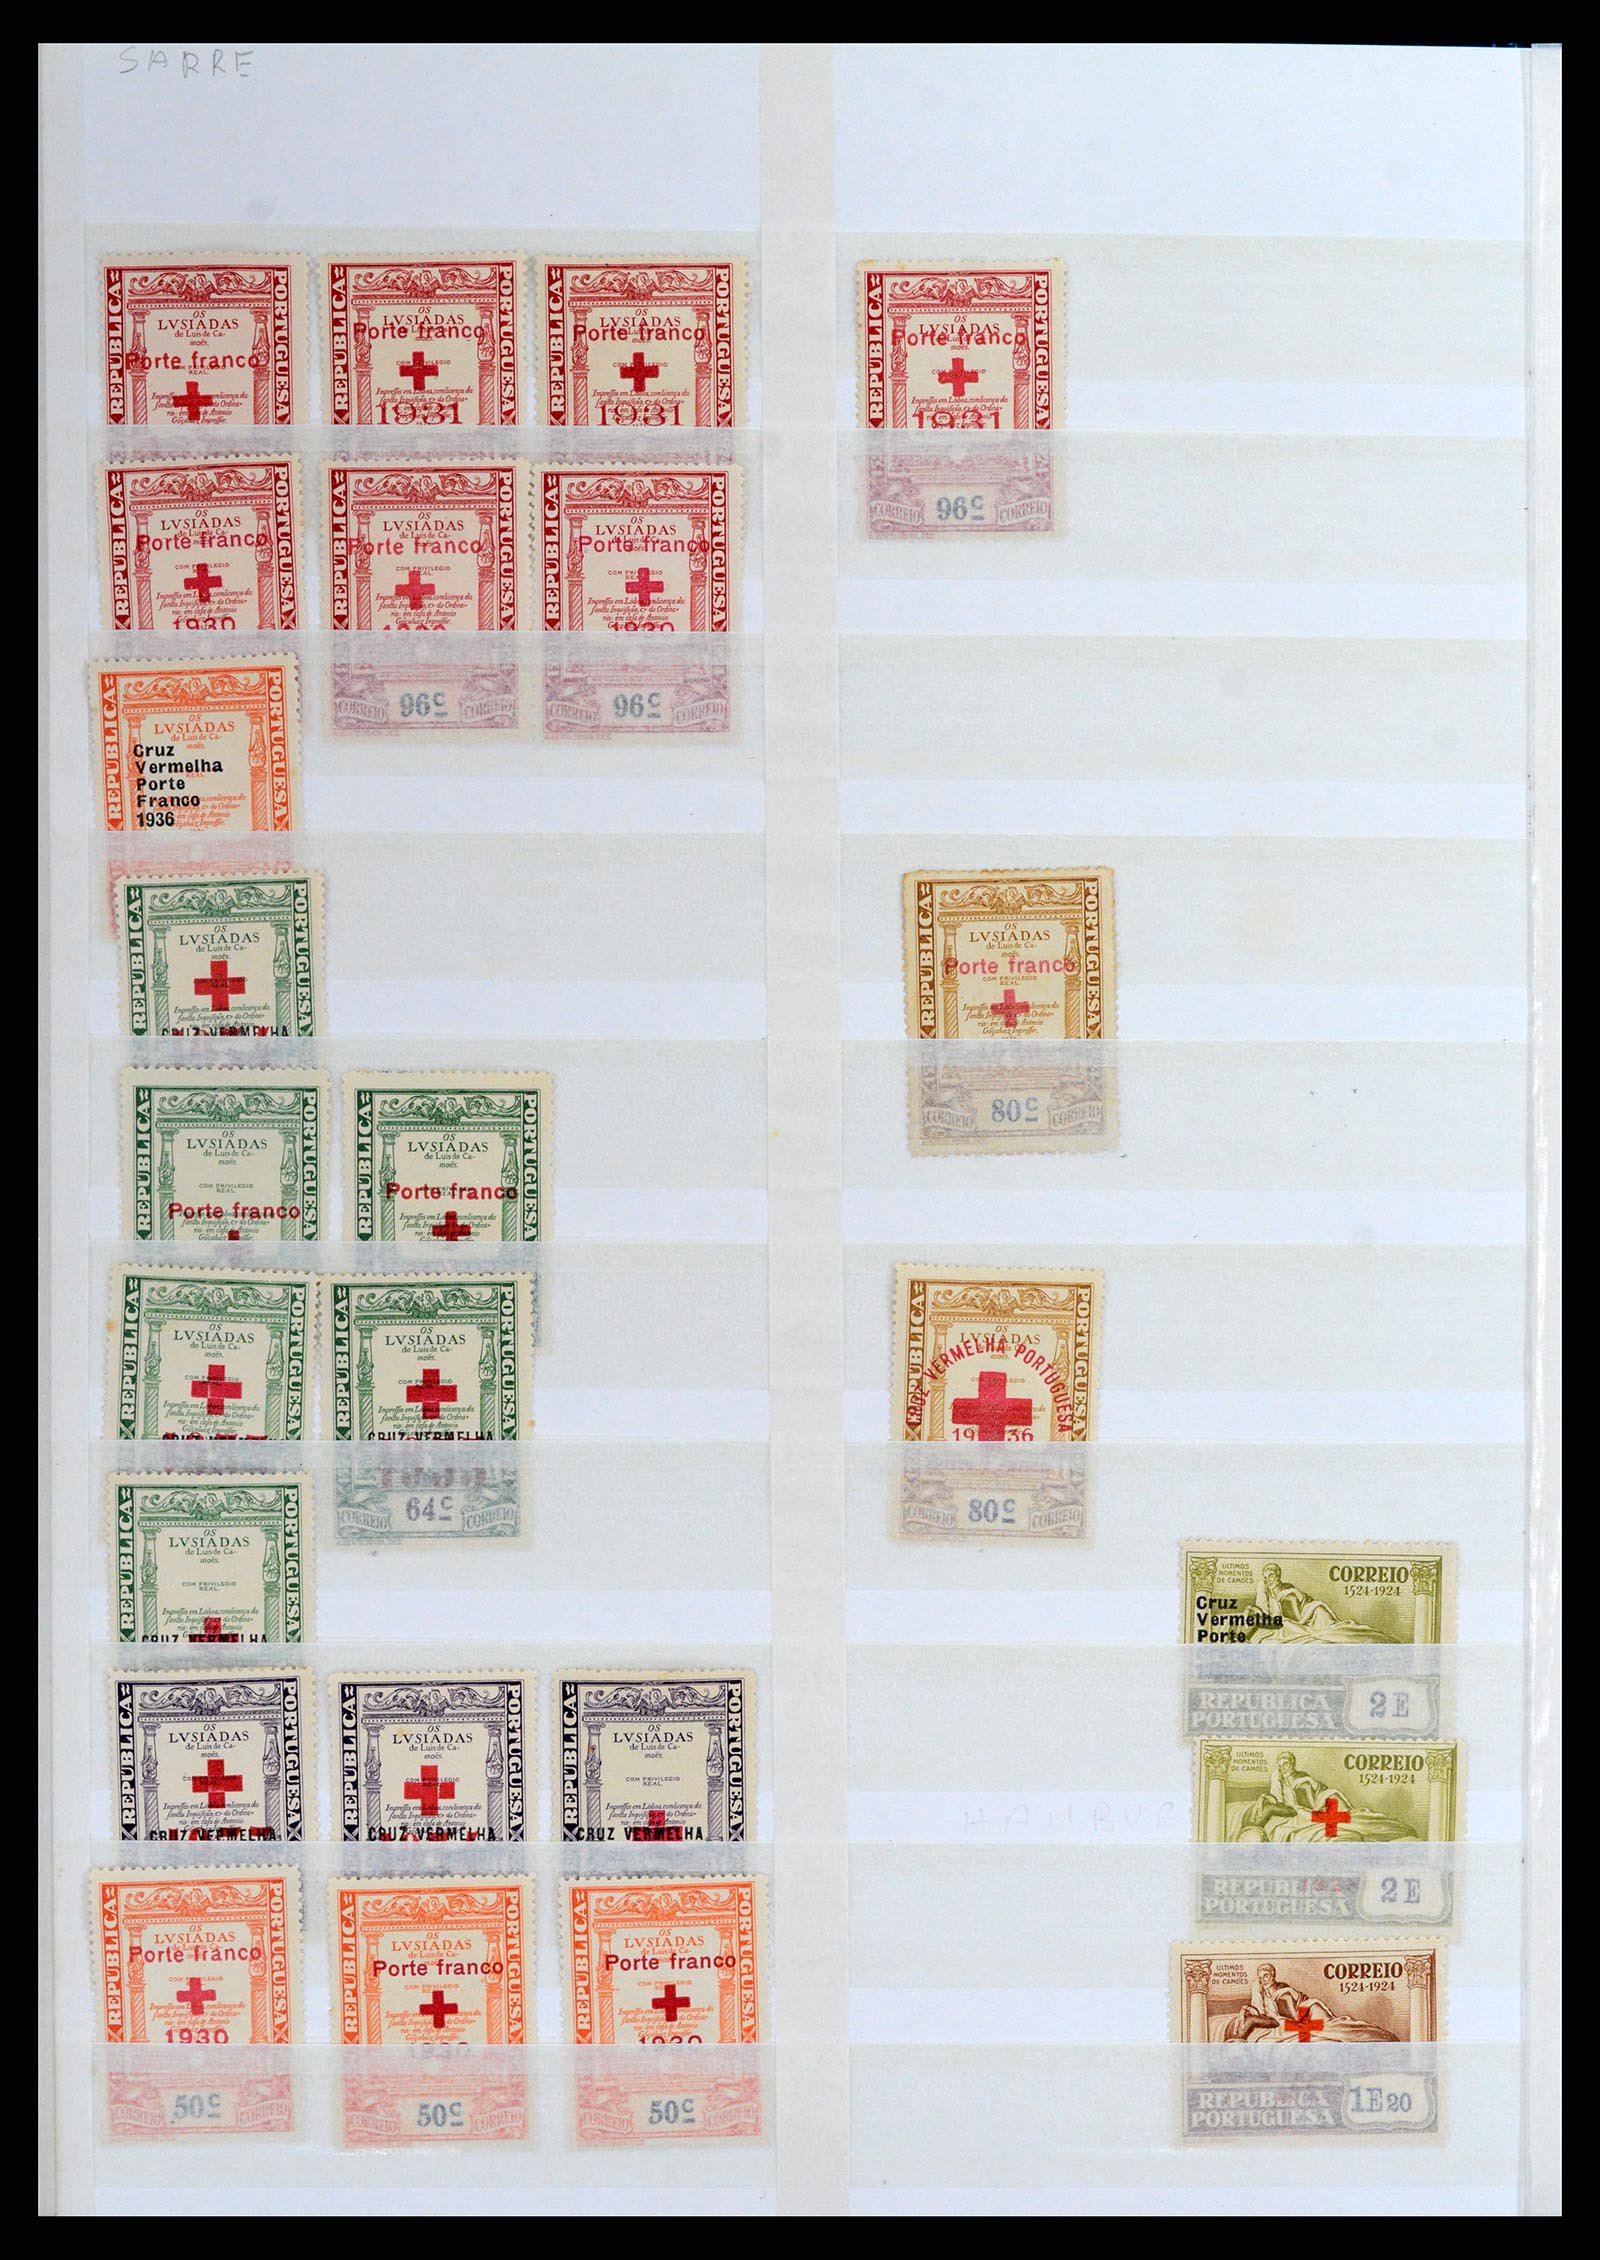 37885 011 - Stamp Collection 37885 Theme Red Cross 1906-2000.